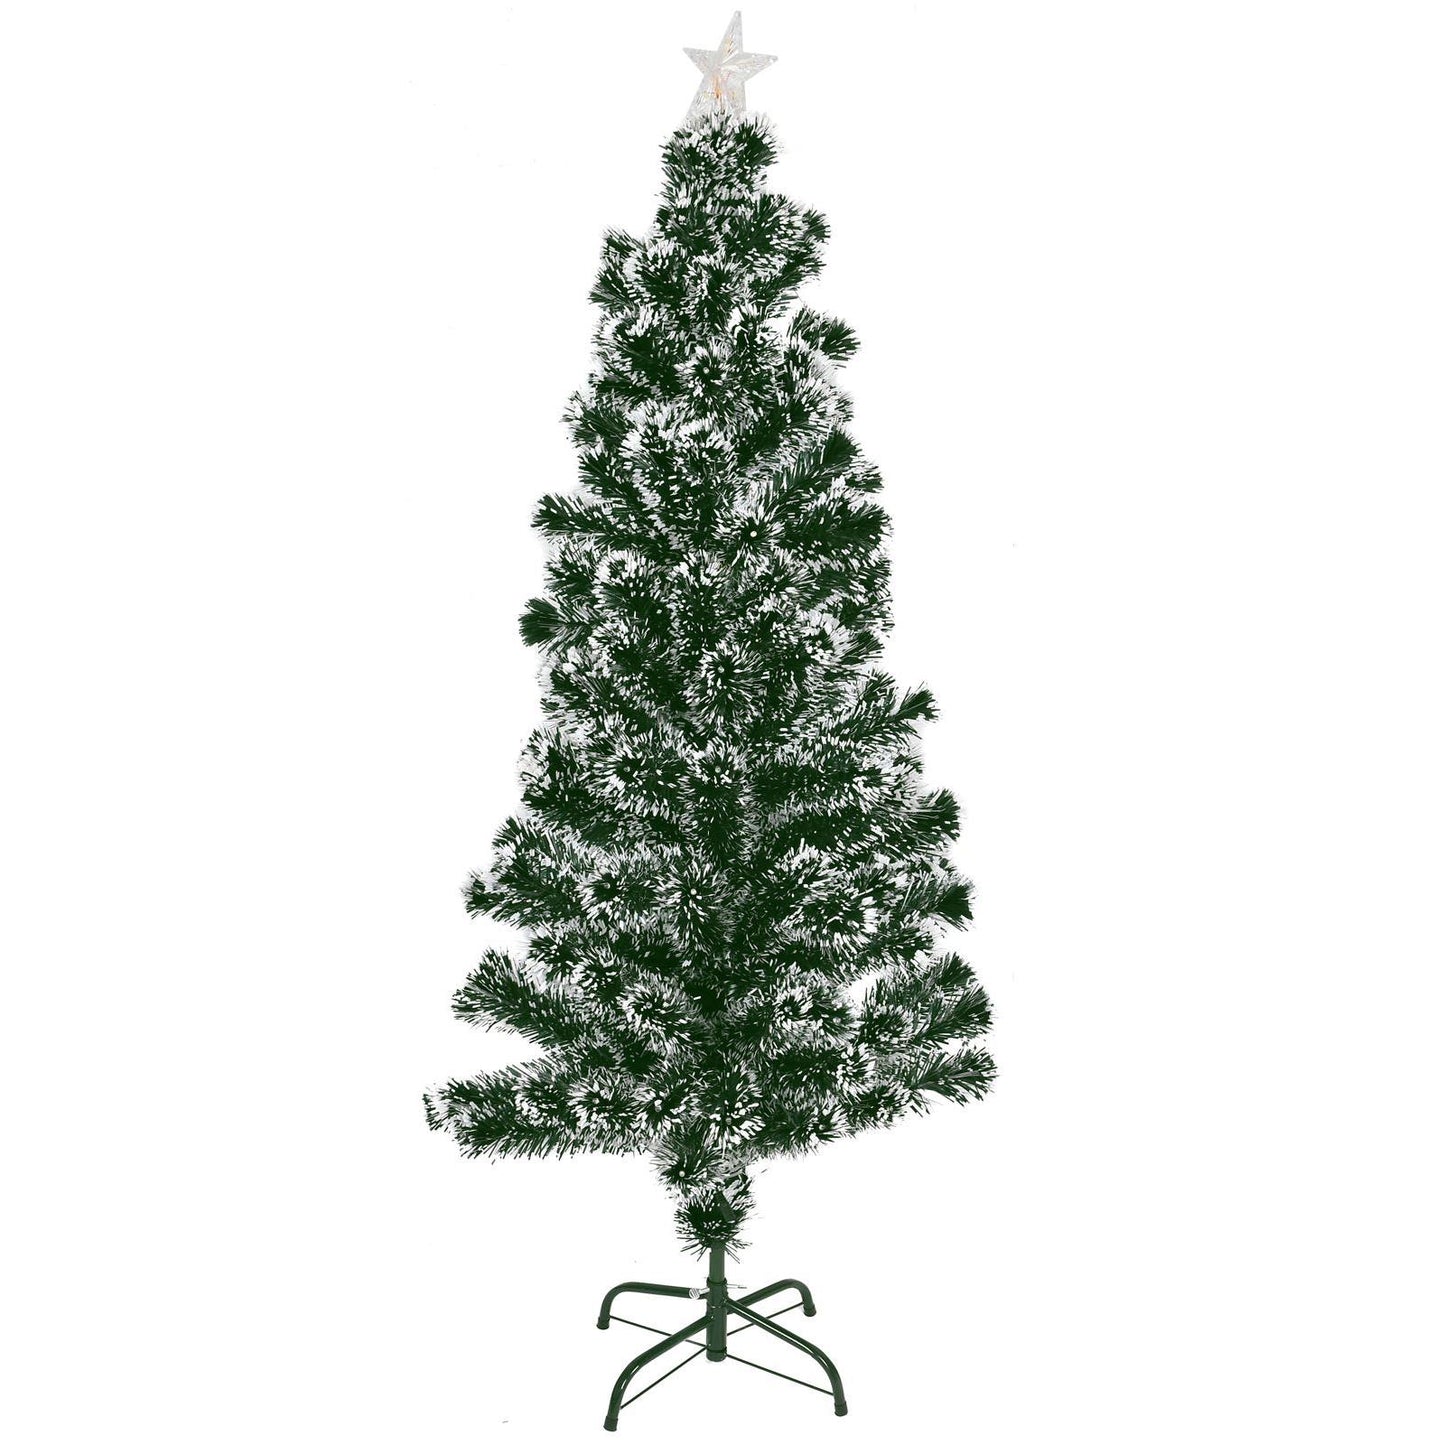 Decorate Your Home for the Holidays with a Pine Tree